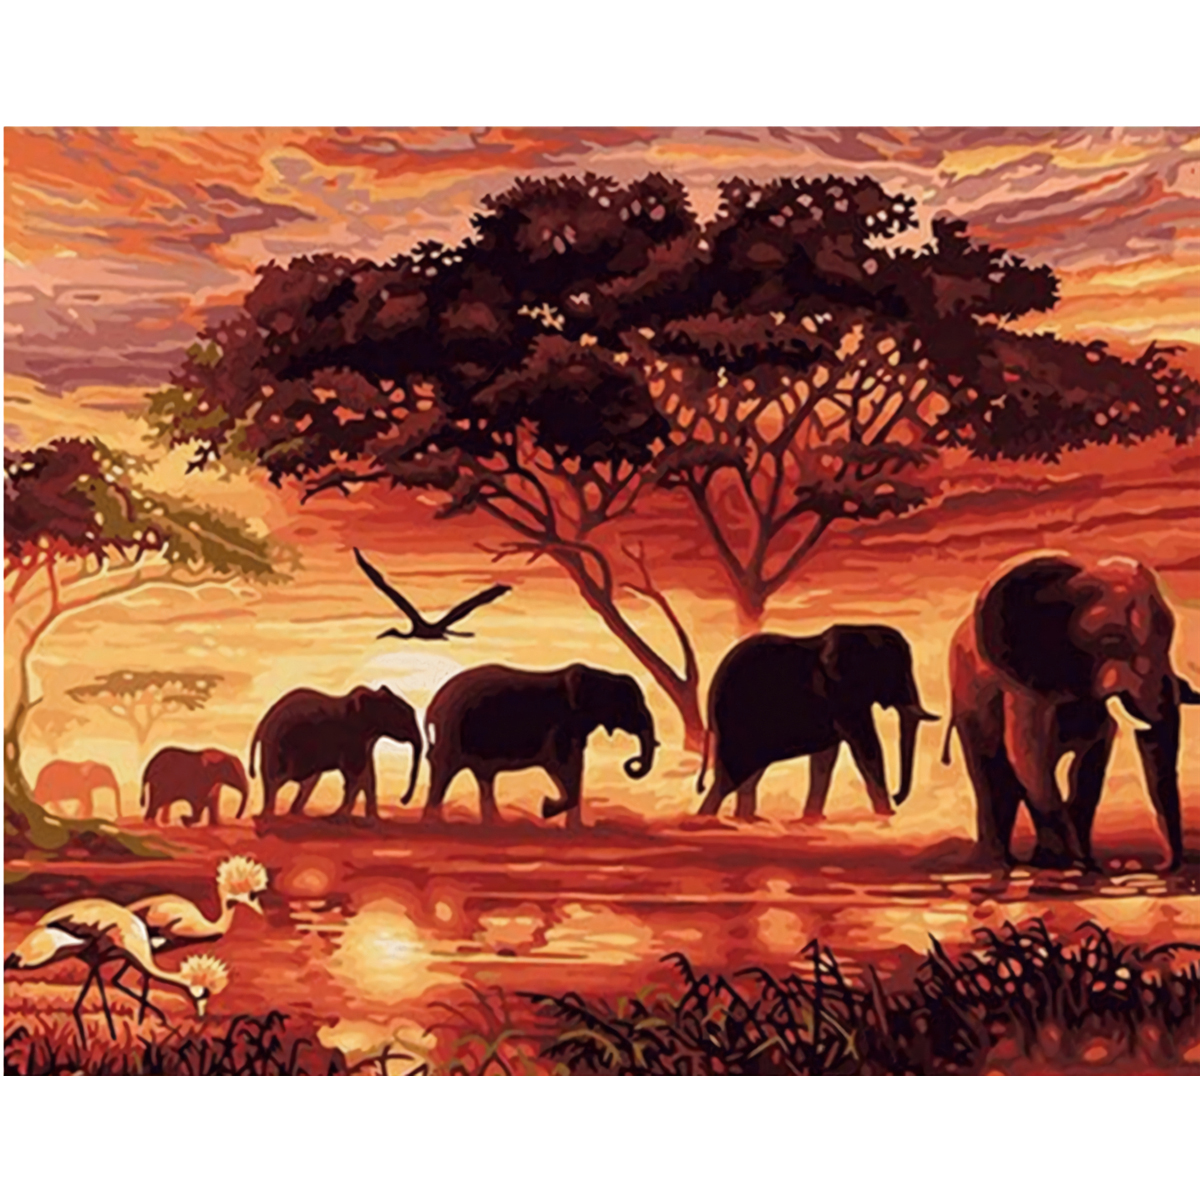 DIY-Diamond-Painting-Elephant-Scenery-Wall-Painting-Hanging-Pictures-Handmade-Wall-Decorations-Gifts-1744020-1